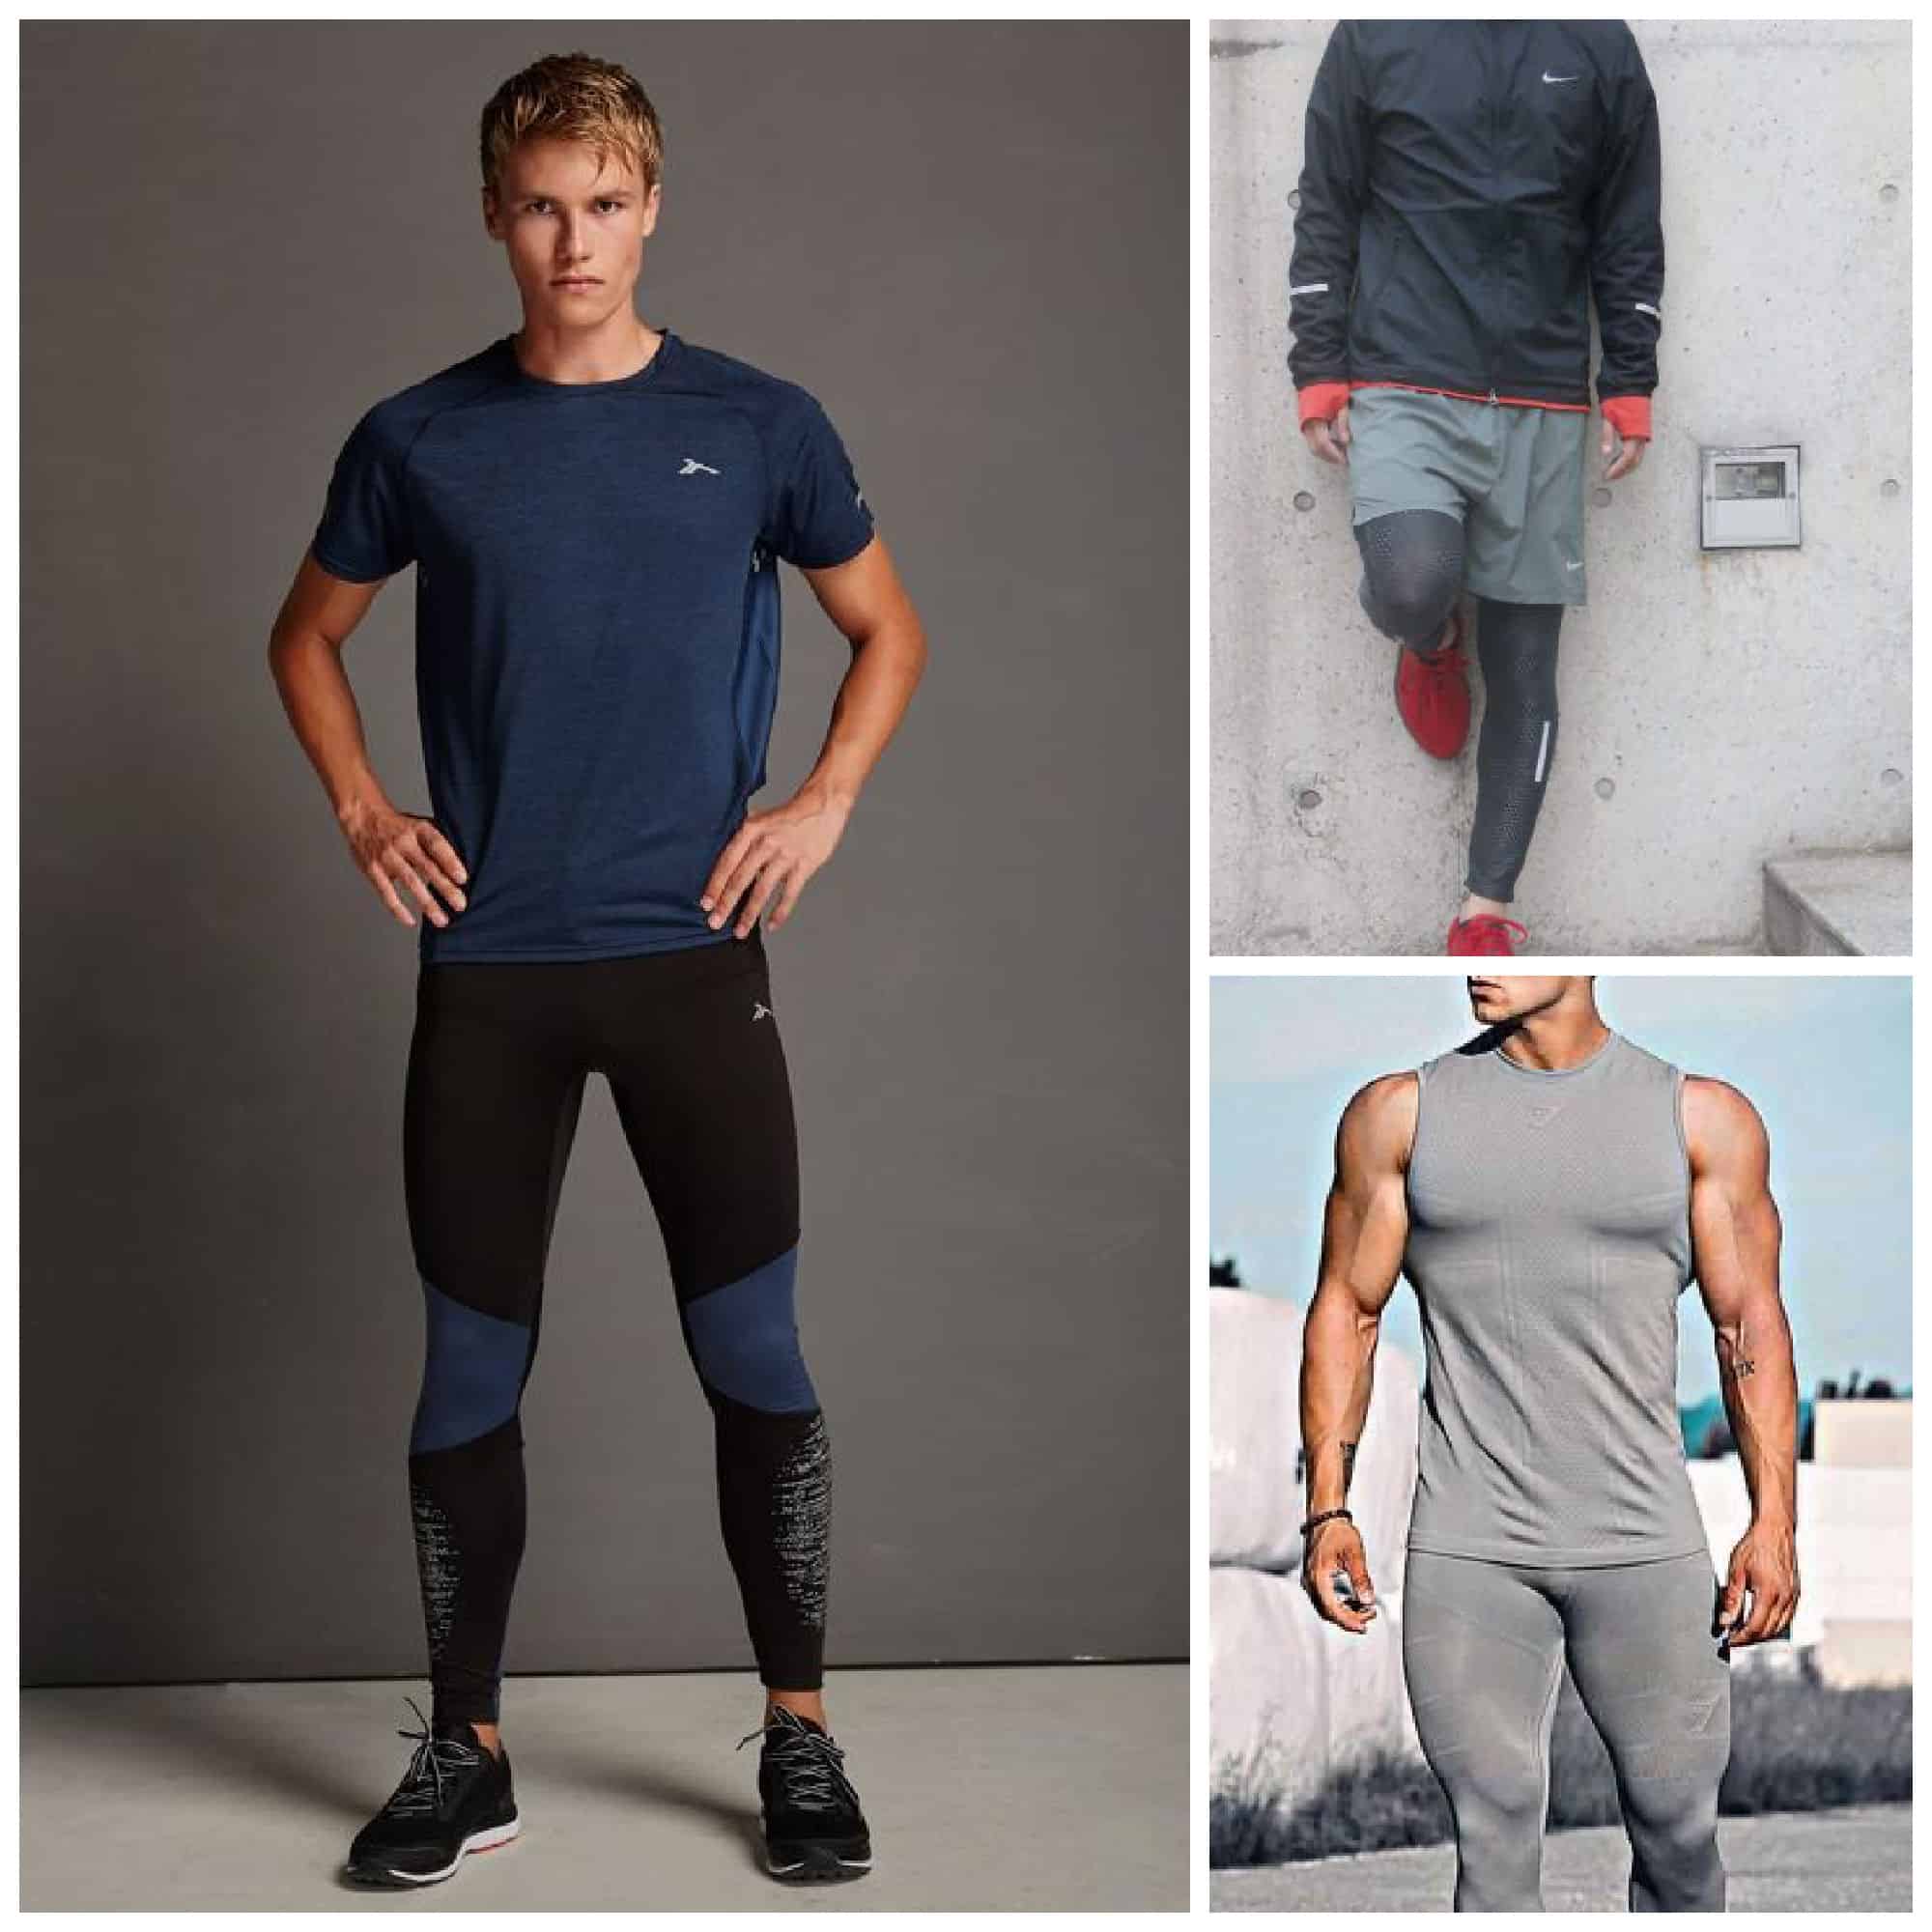 Men wearing Tights under shorts.  Outfit with tights, Mens tights